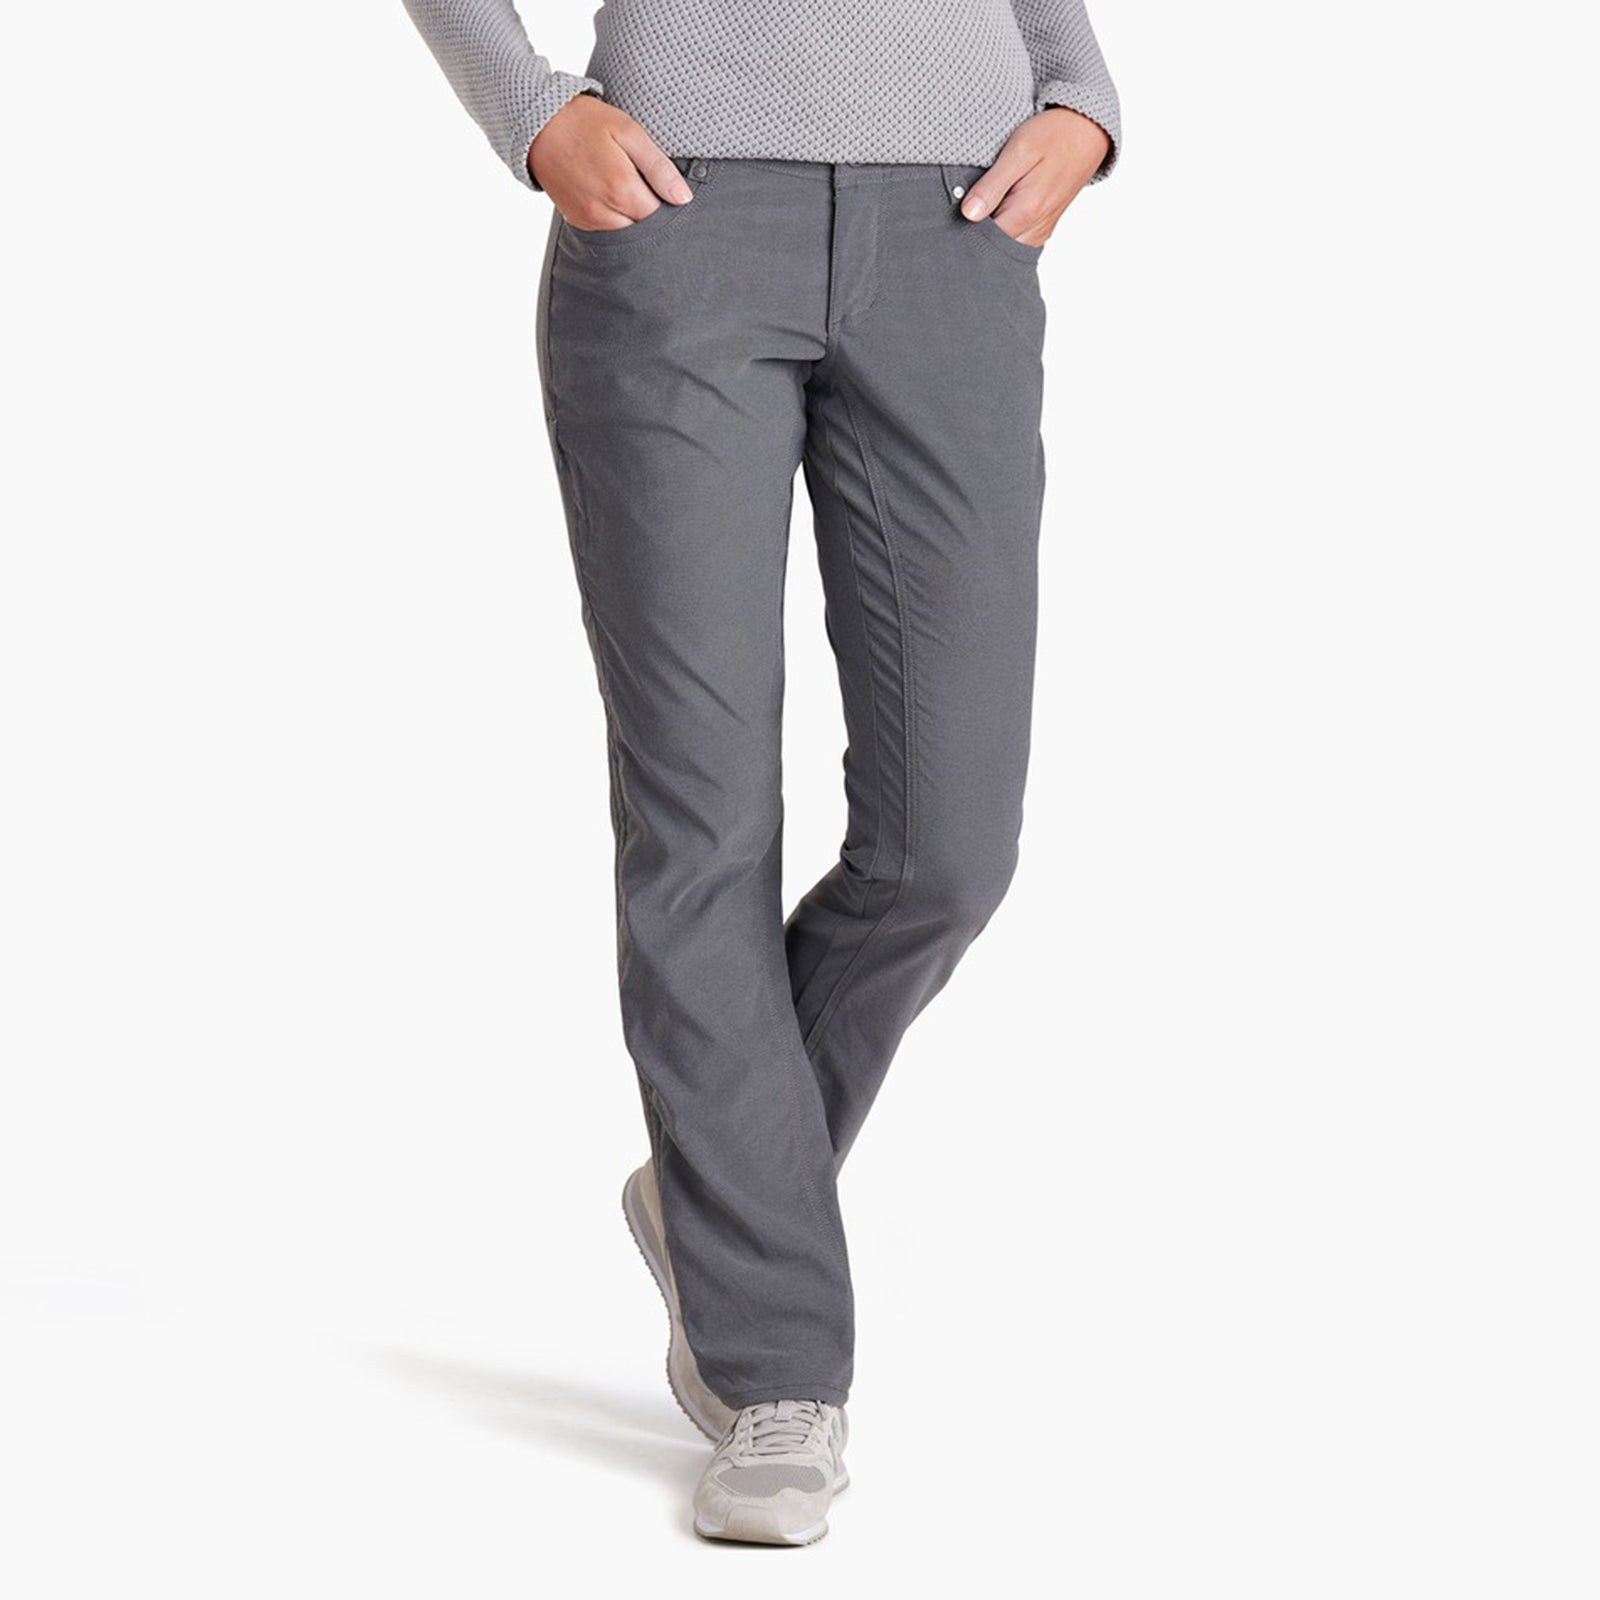 kuhl hiking pant womens front view on model in color dark grey